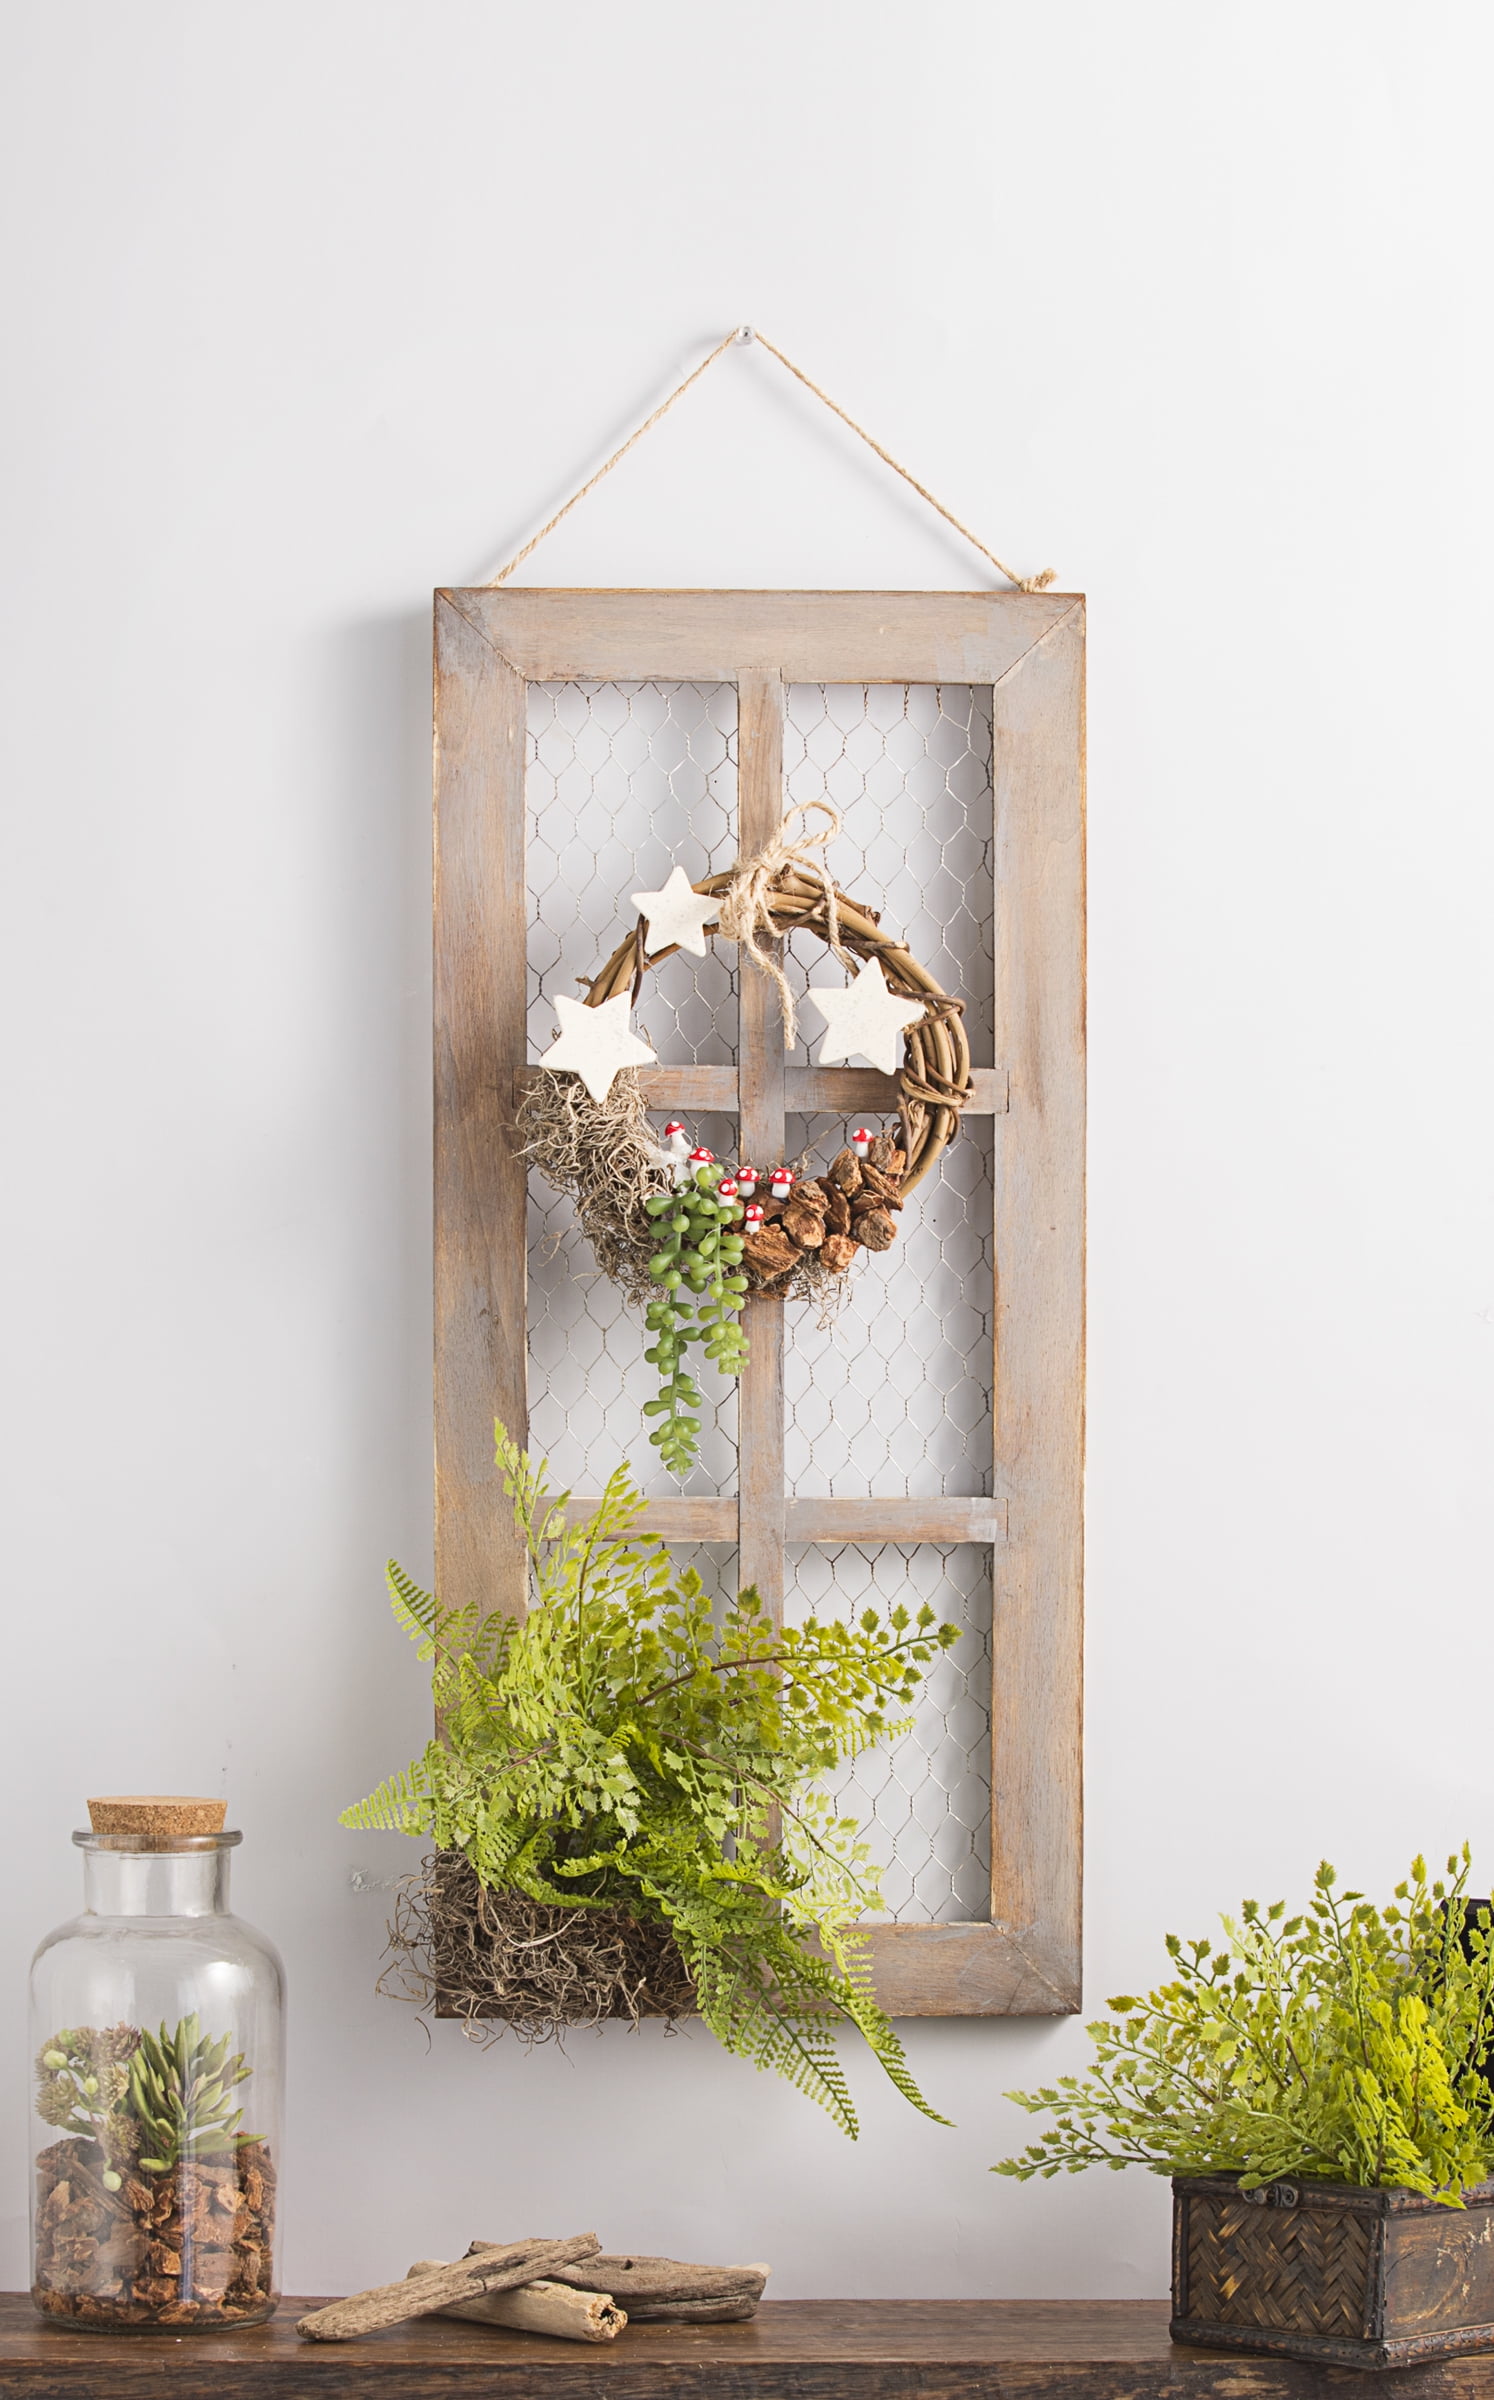 Wall art: old window frame, chicken wire, old bottles and greenery